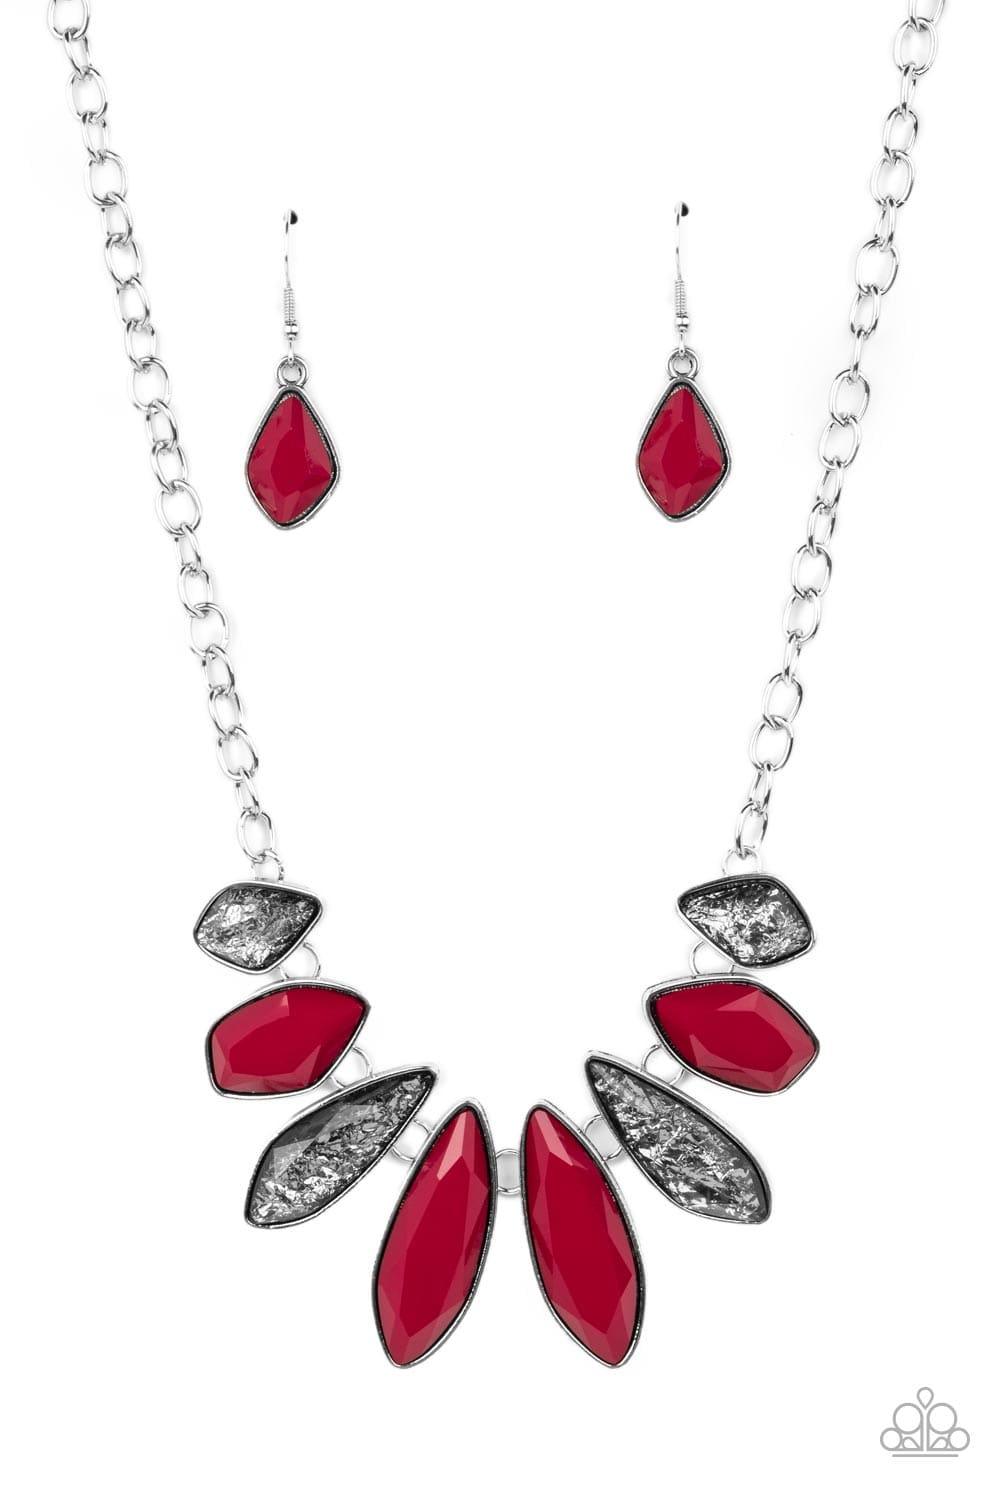 Paparazzi Accessories - Crystallized Couture - Red Necklace - Bling by JessieK